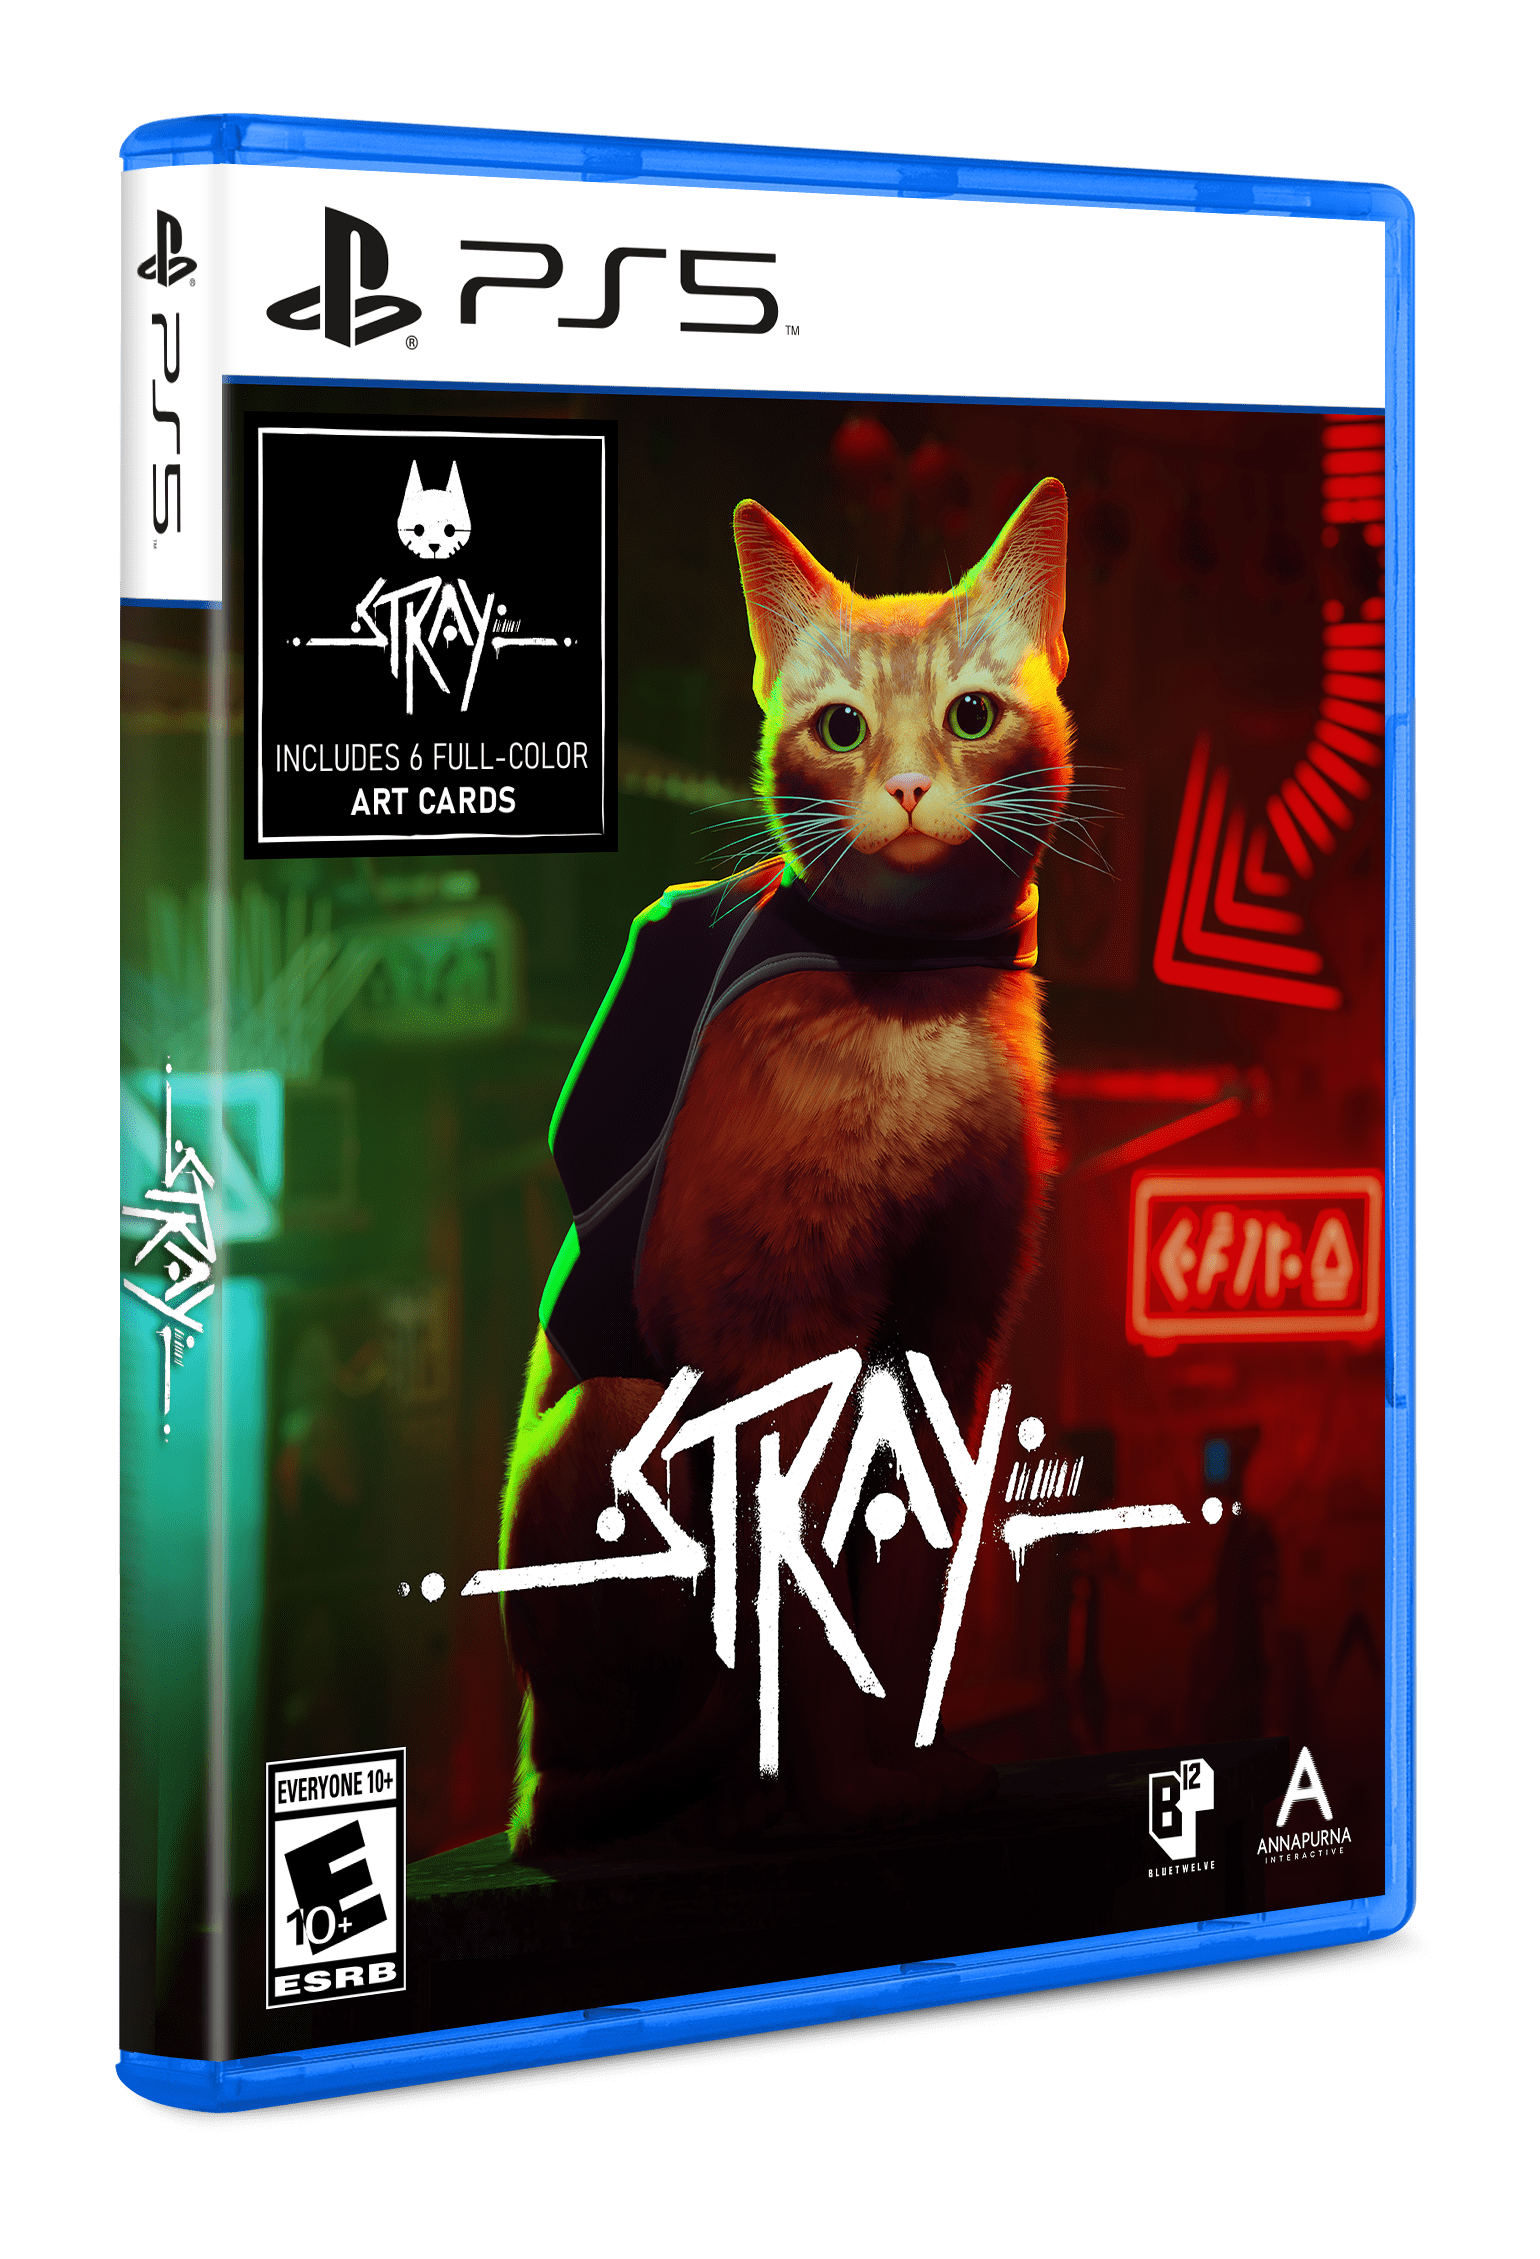 Stray PS5 Physical Version Launches on September 20!